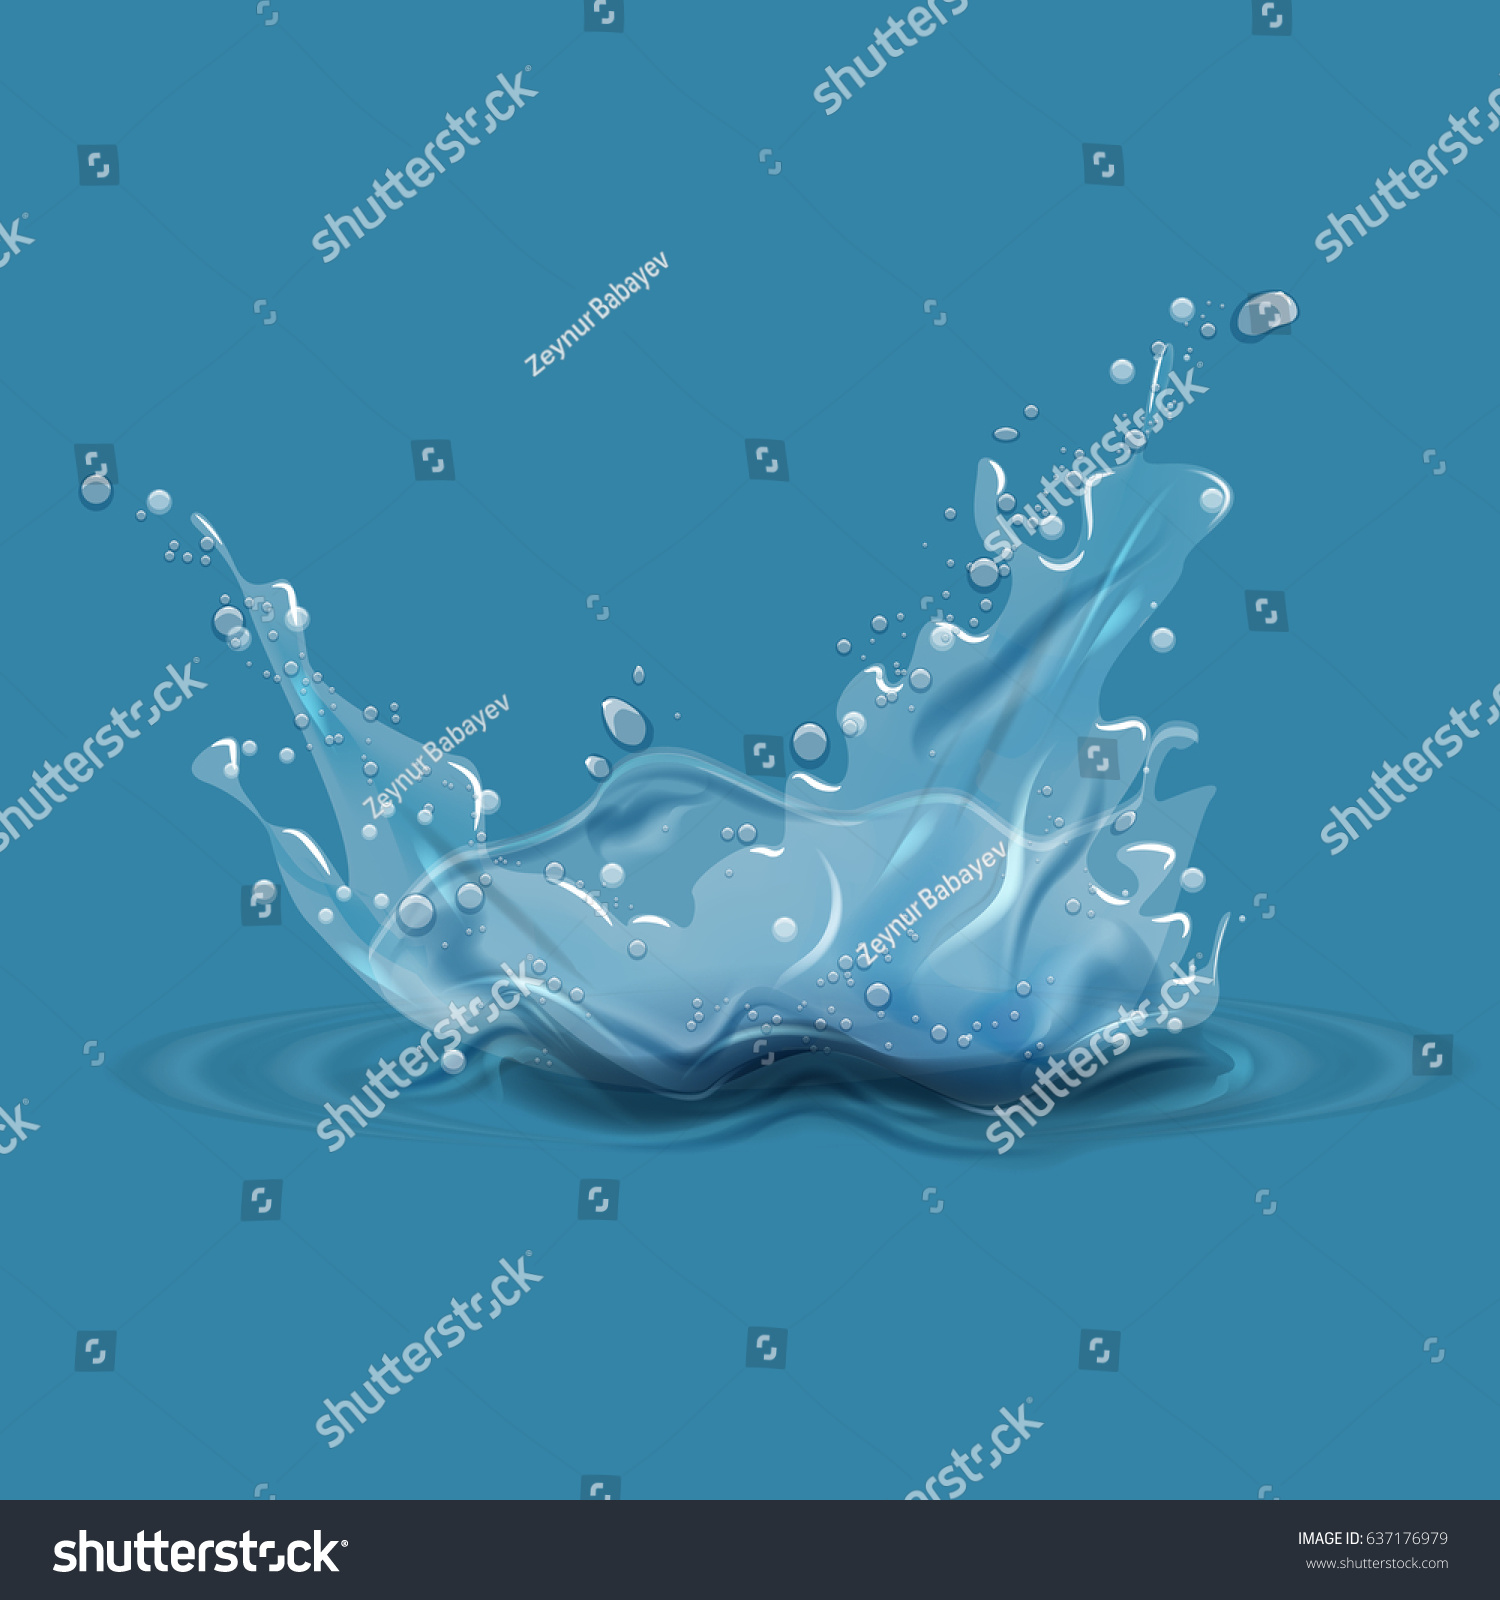 Illustrated Water splash for your advertisement background. Rasterized copy. #637176979